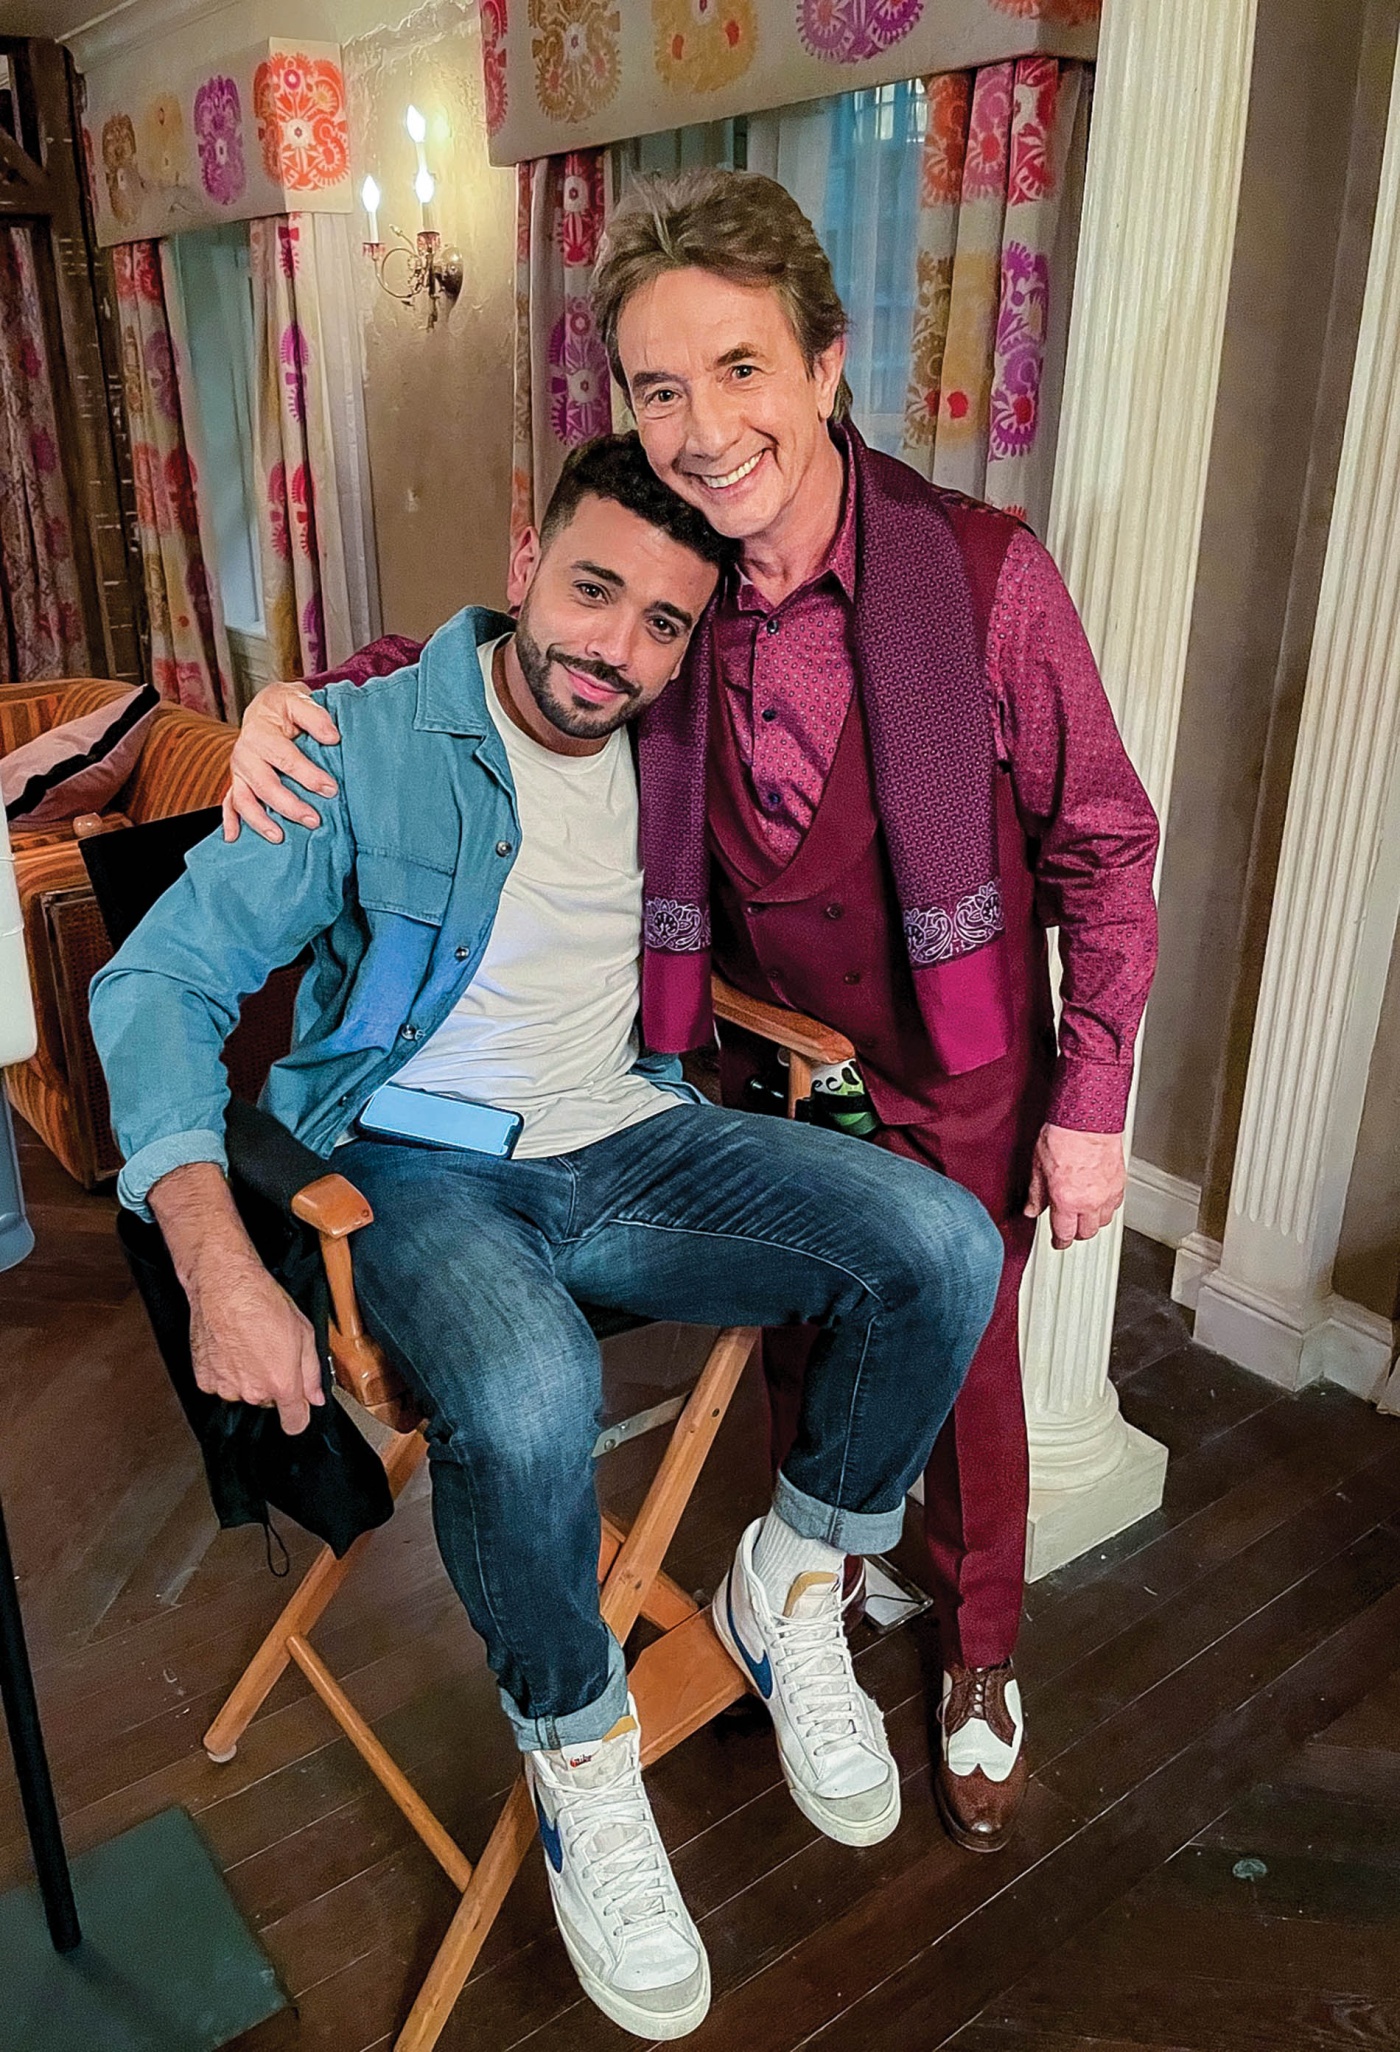 Image of Ryan Broussard on set with Martin Short on set for season two of "Only Murders"